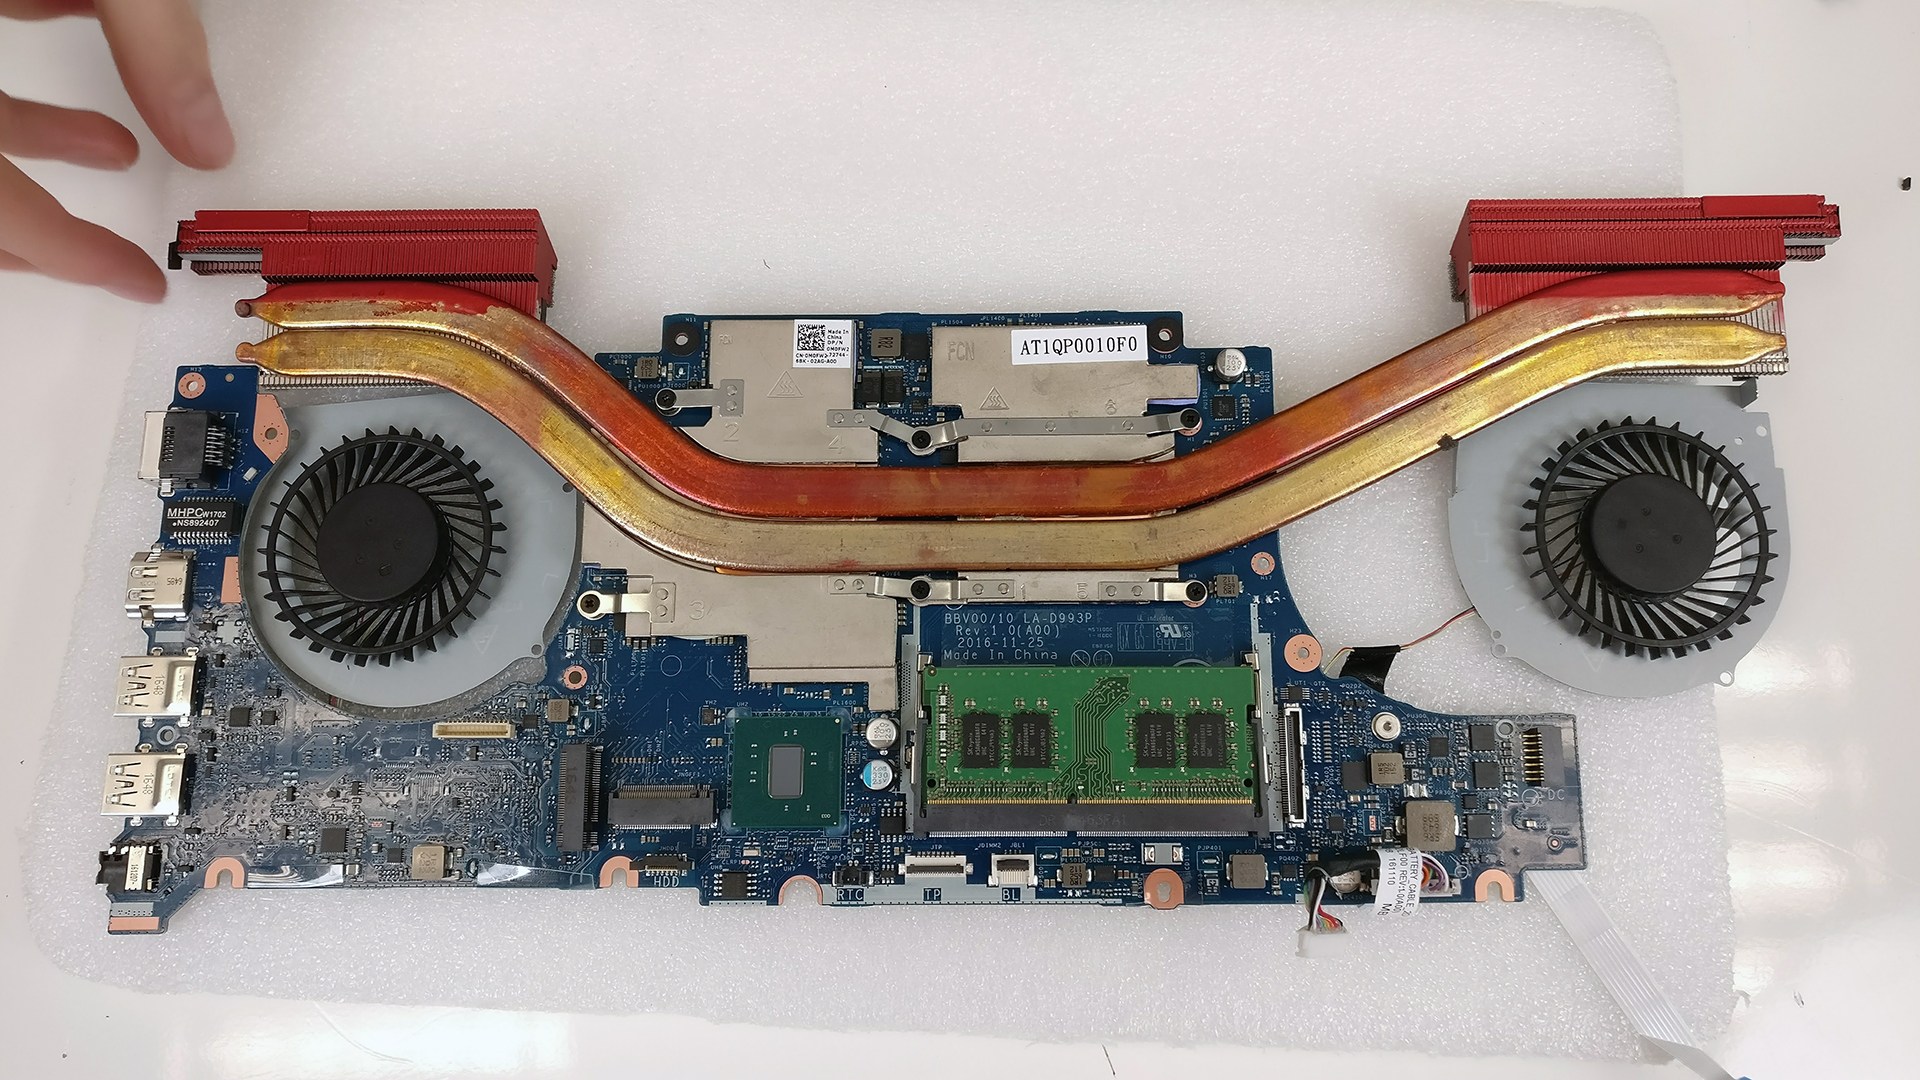 Dell Inspiron 15 i7559 motherboard change - CPUs, Motherboards, and